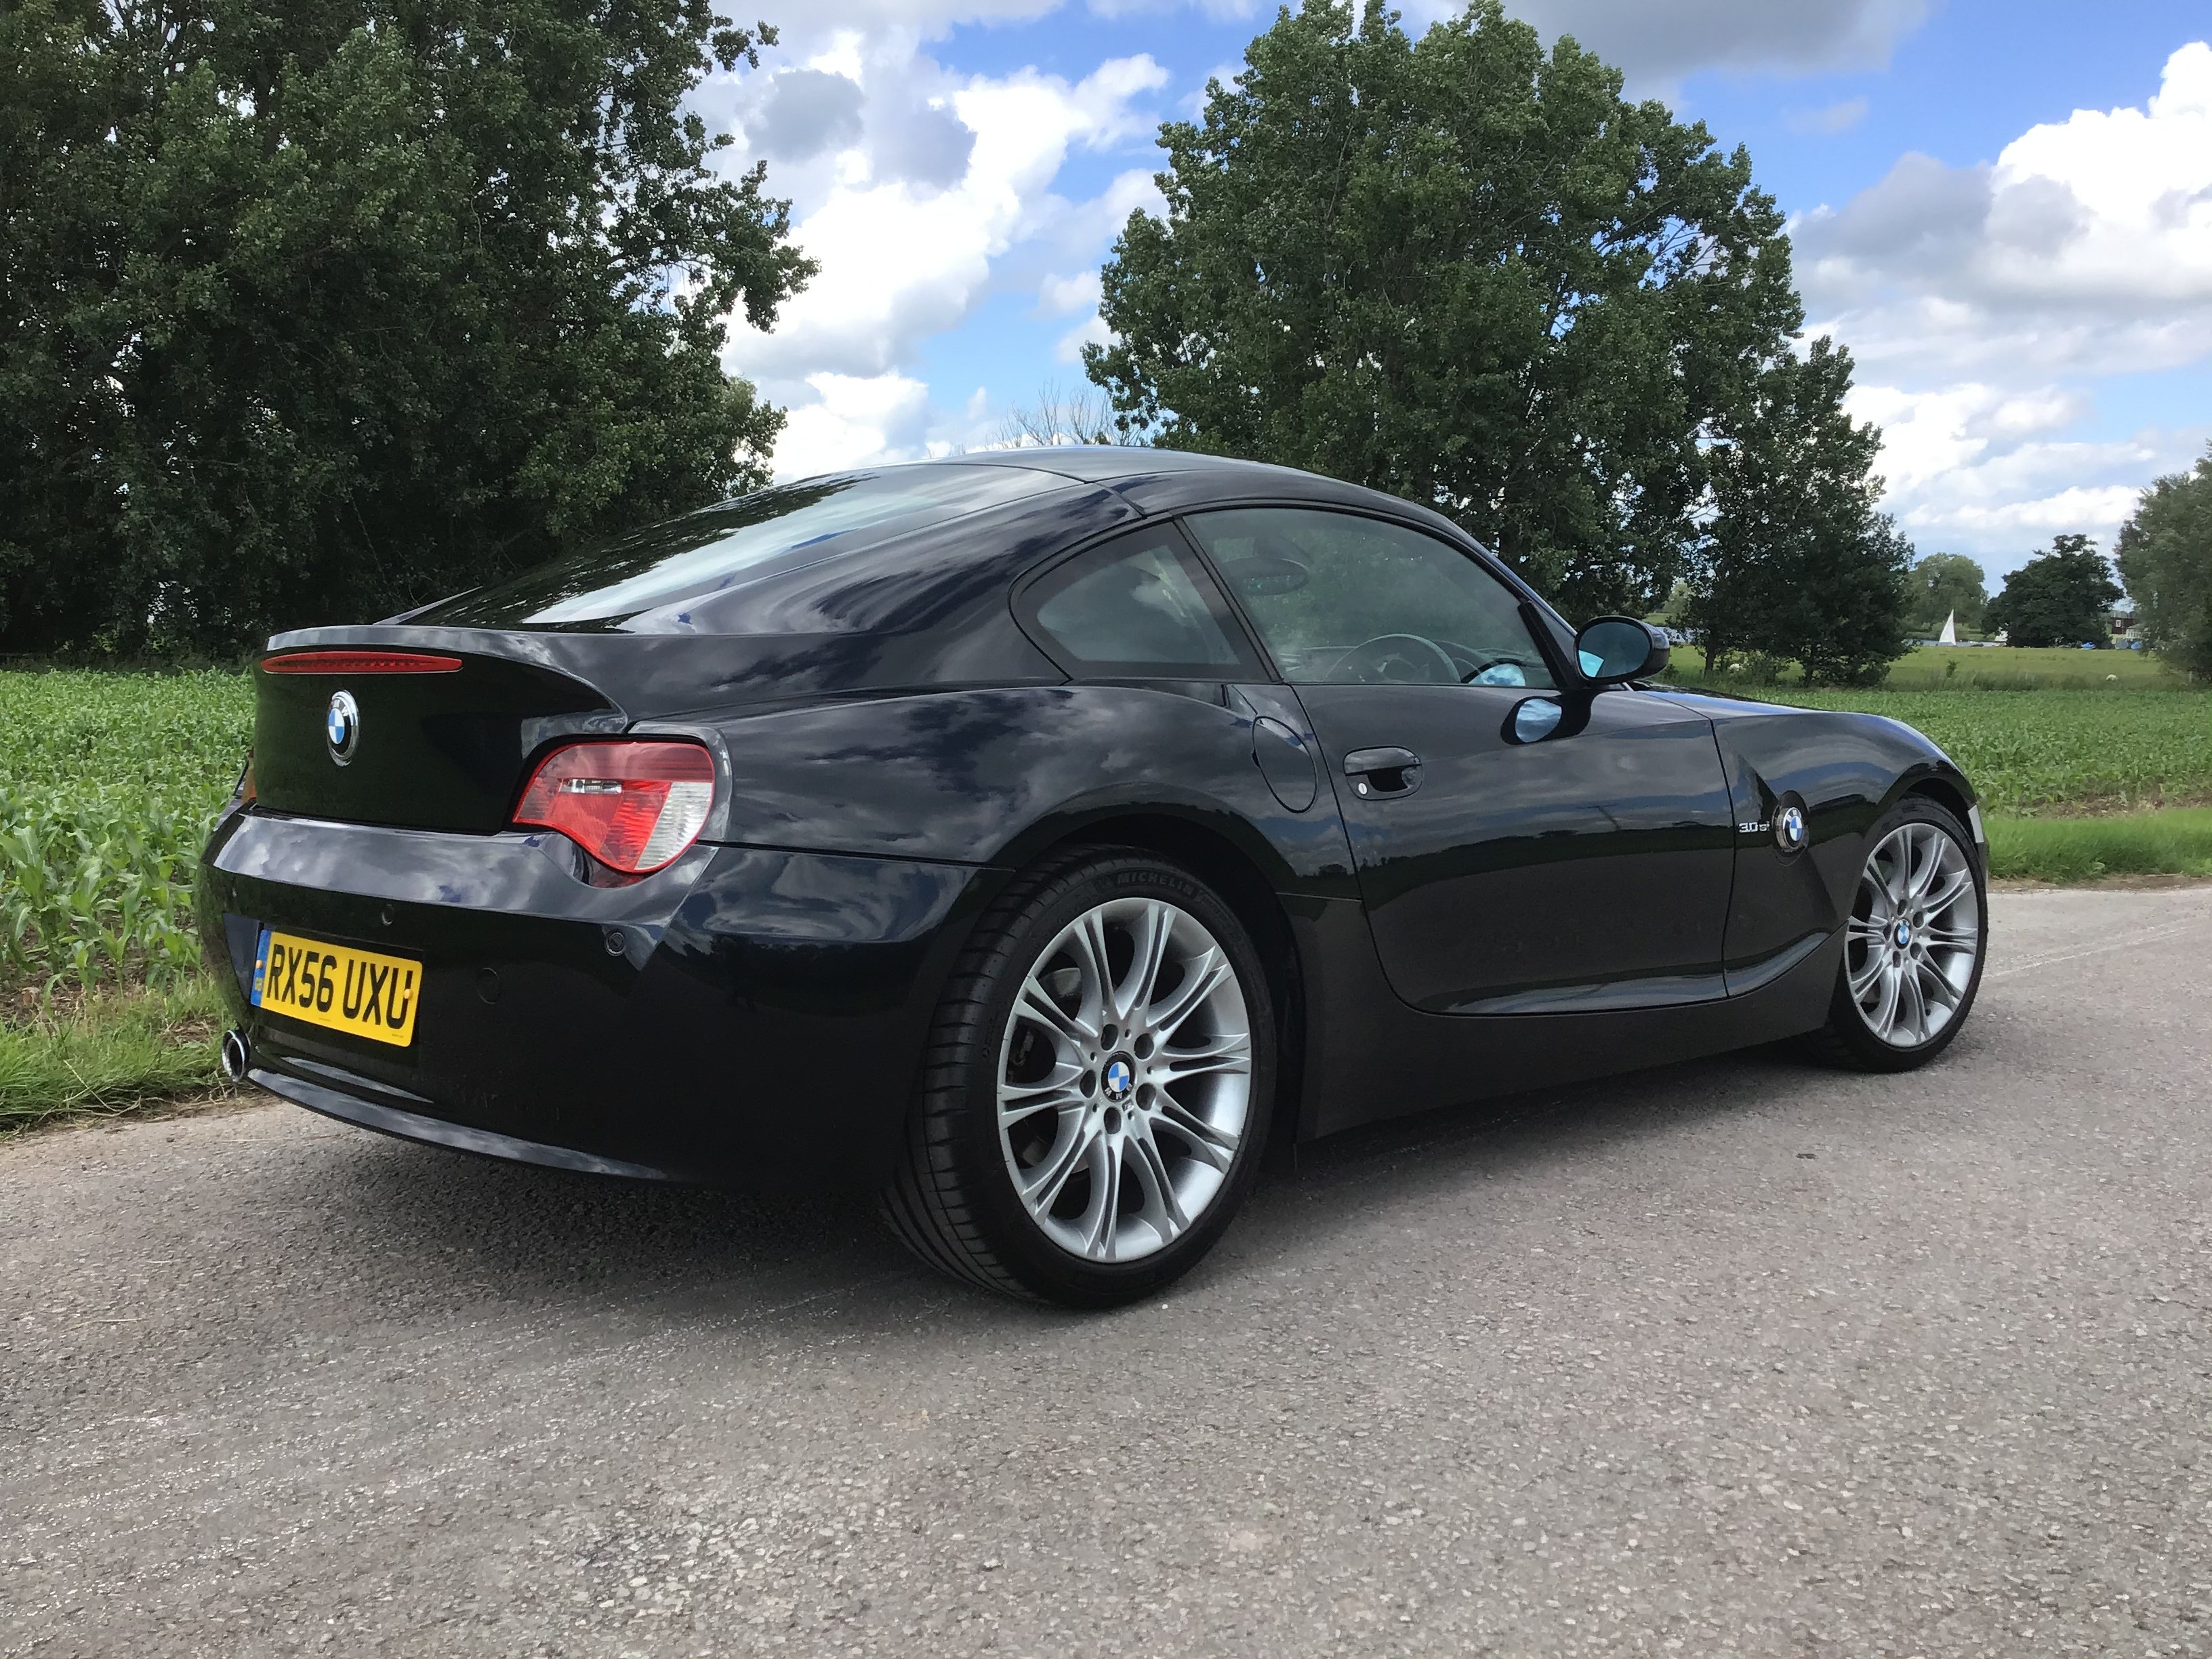 BMW Z4 Coupe Track Toy Build - Page 2 - Readers' Cars - PistonHeads